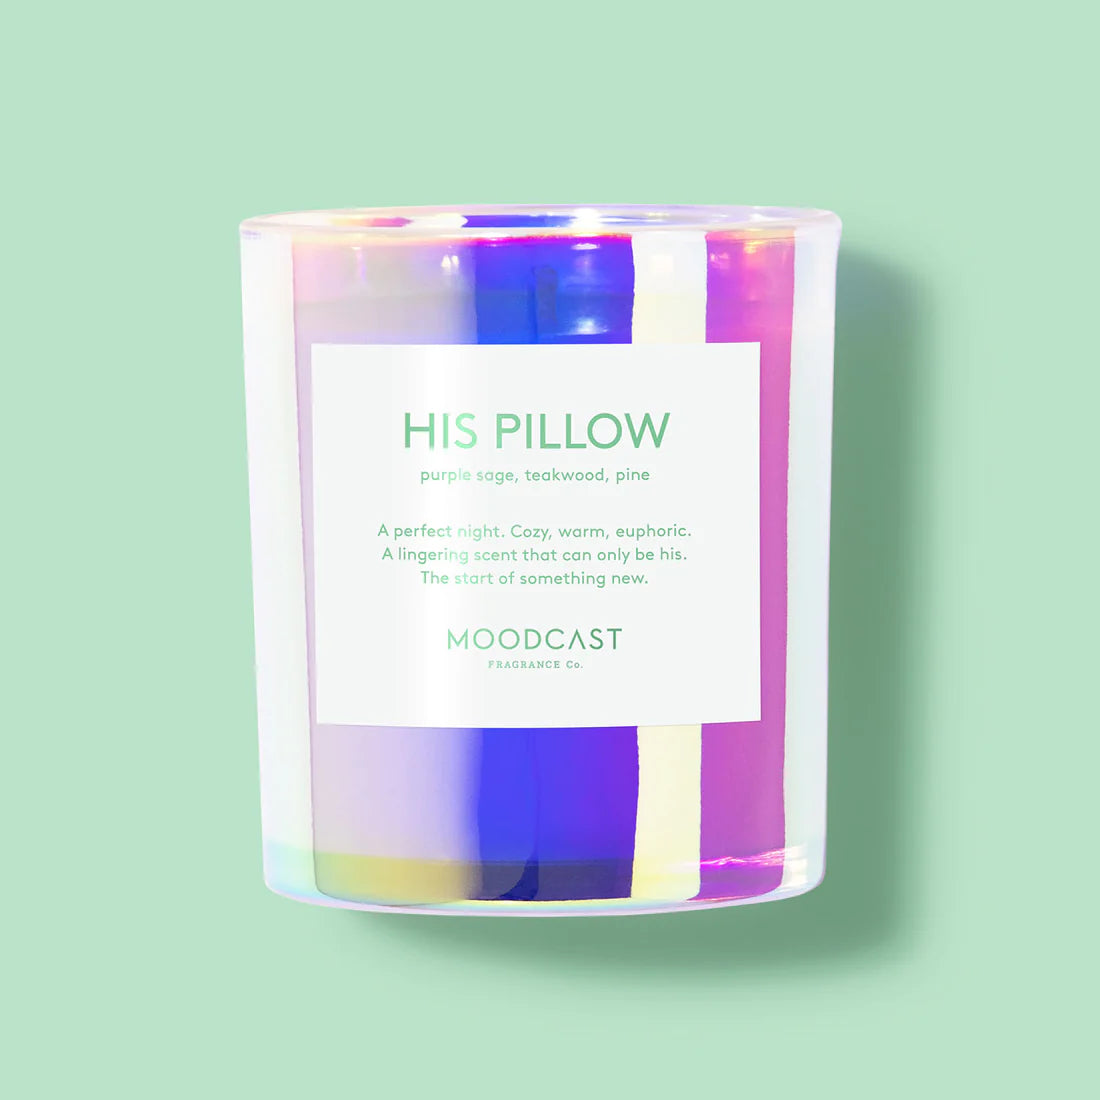 Moodcast Candle Iridescent 8oz Candles in His Pillow at Wrapsody